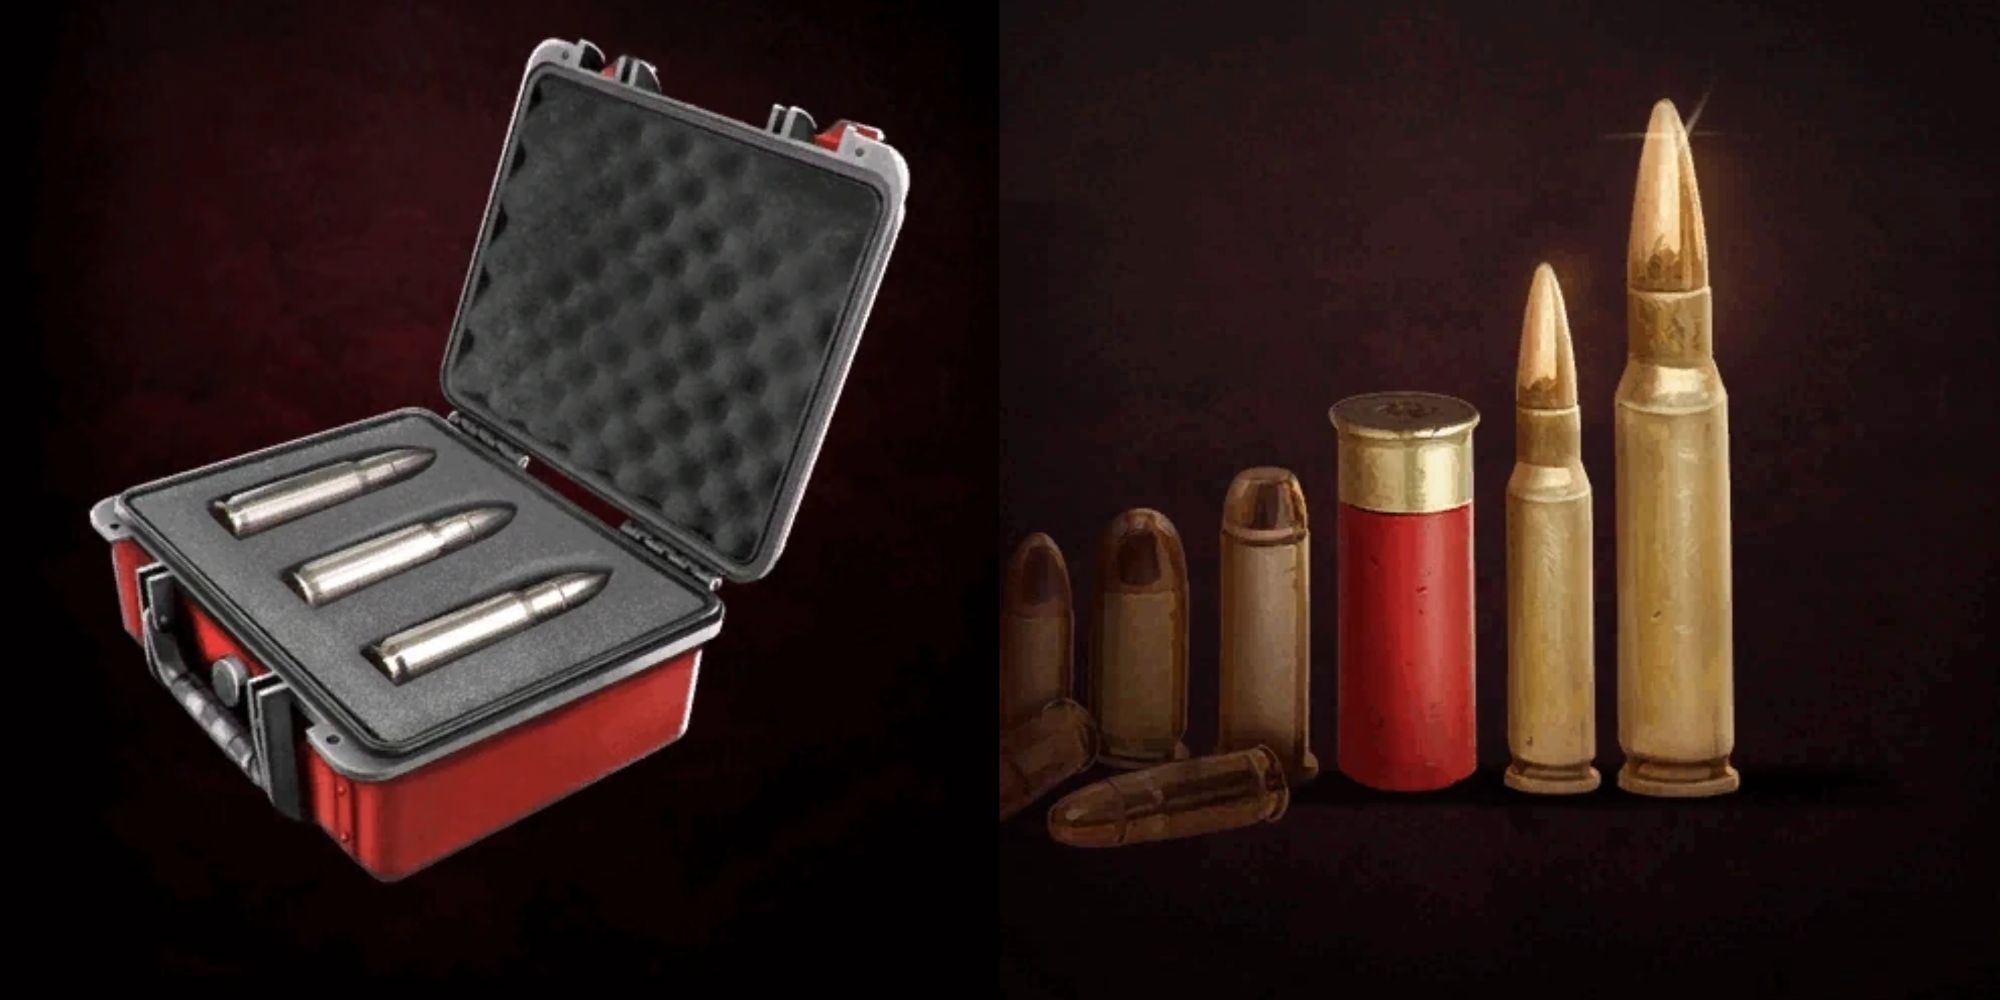 The art for Silver Bullets (left) and Large Caliber Rounds (right)